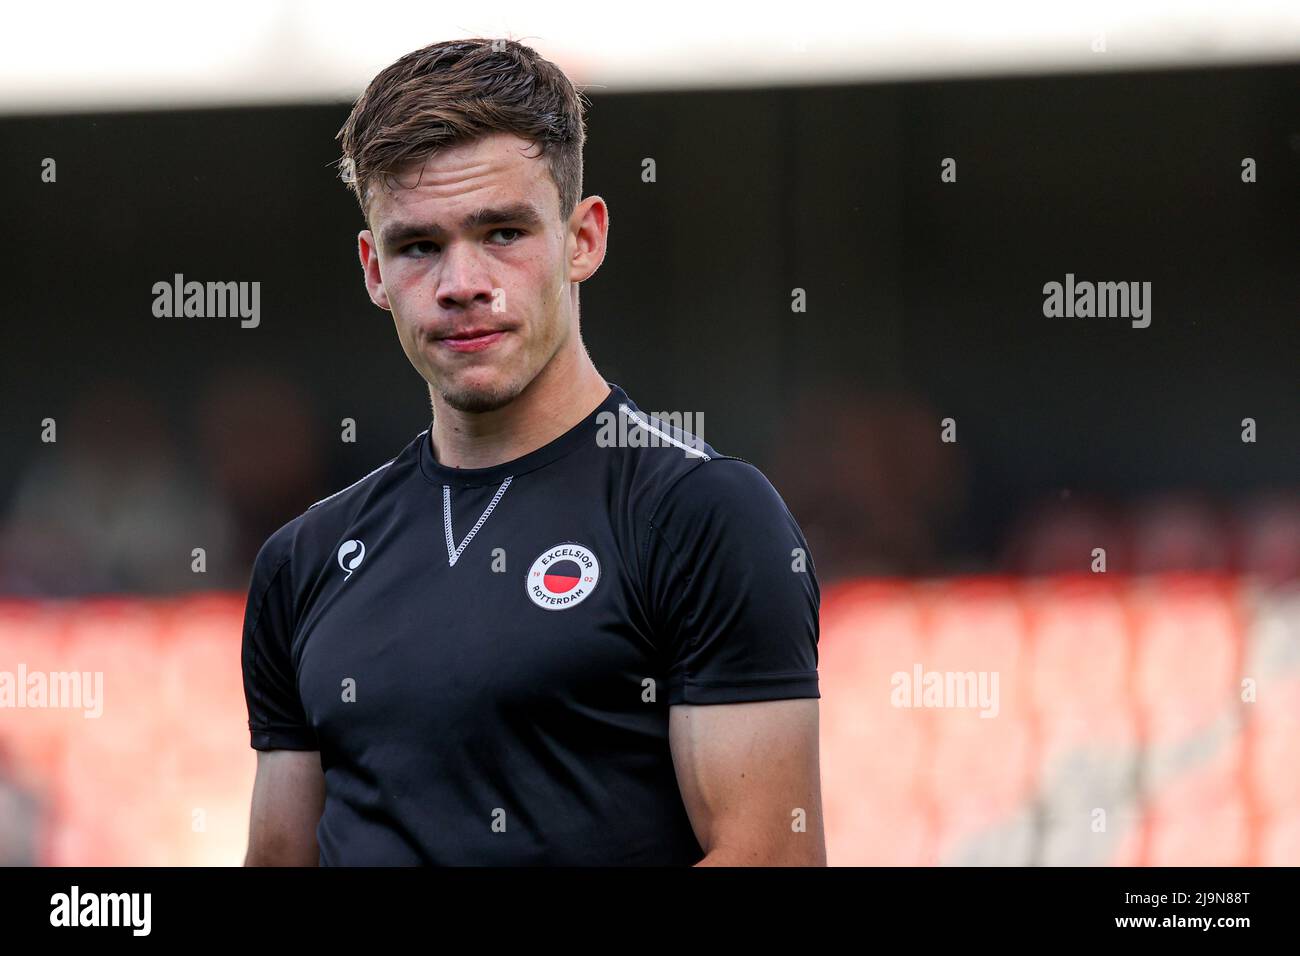 ROTTERDAM, NETHERLANDS - MAY 24: Thijs Dallinga of Excelsior Rotterdam prior to the Dutch Keukenkampioendivisie Playoffs Final - First Leg match between Excelsior Rotterdam and ADO Den Haag at Van Donge & De Roo Stadion on May 24, 2022 in Rotterdam, Netherlands (Photo by Herman Dingler/Orange Pictures) Credit: Orange Pics BV/Alamy Live News Stock Photo